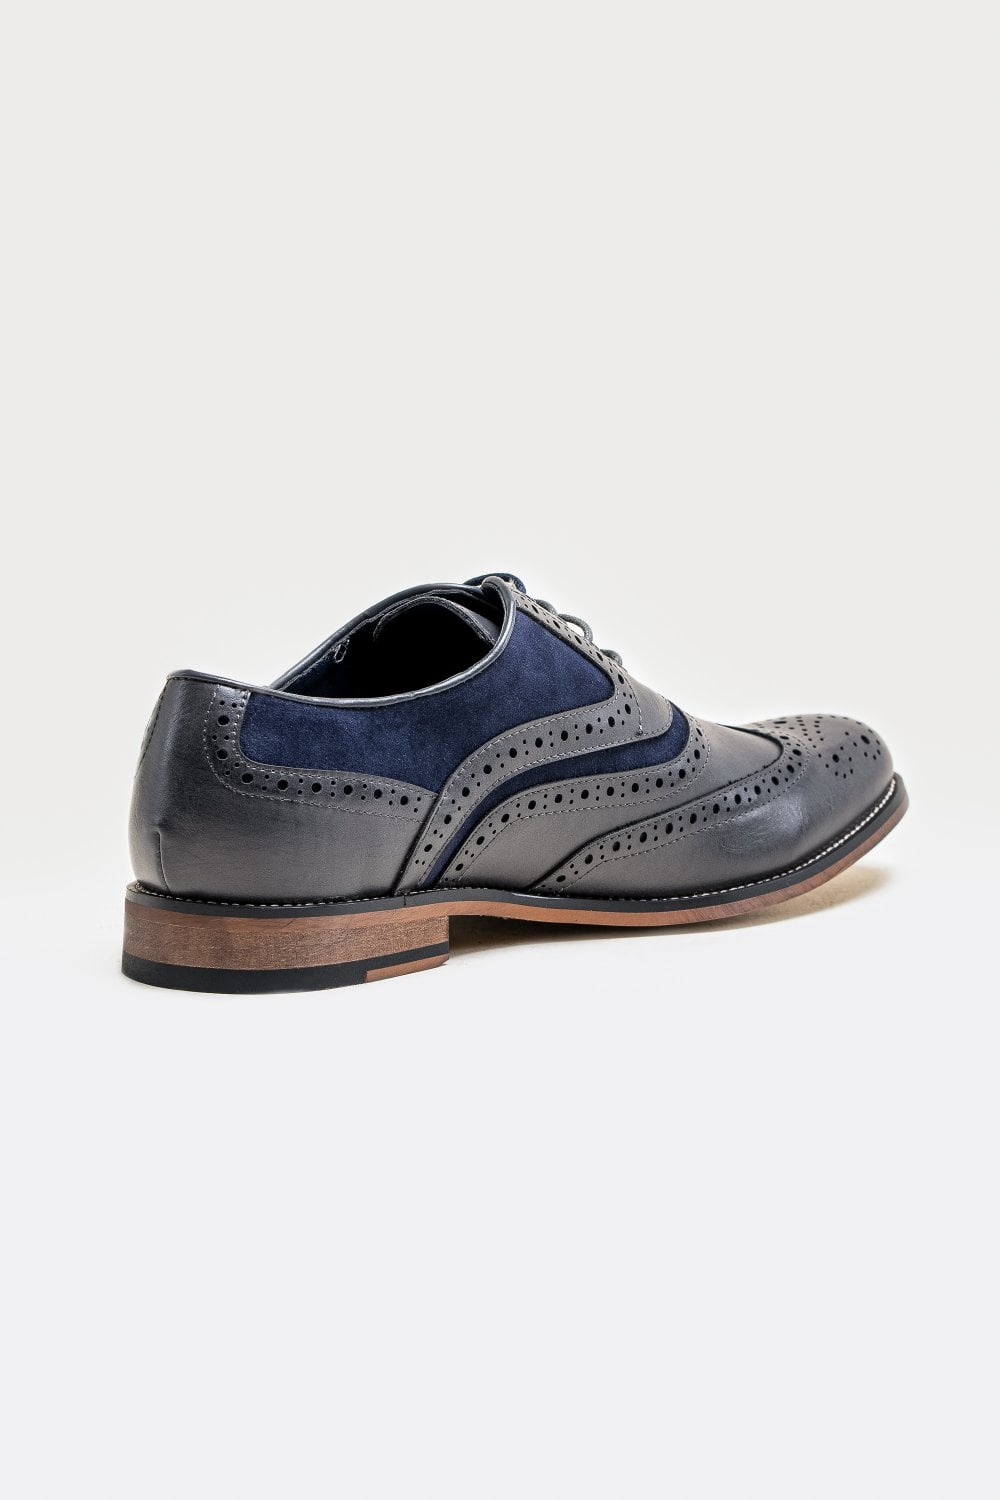 HOUSE OF CAVANI Russell Brogue Shoes